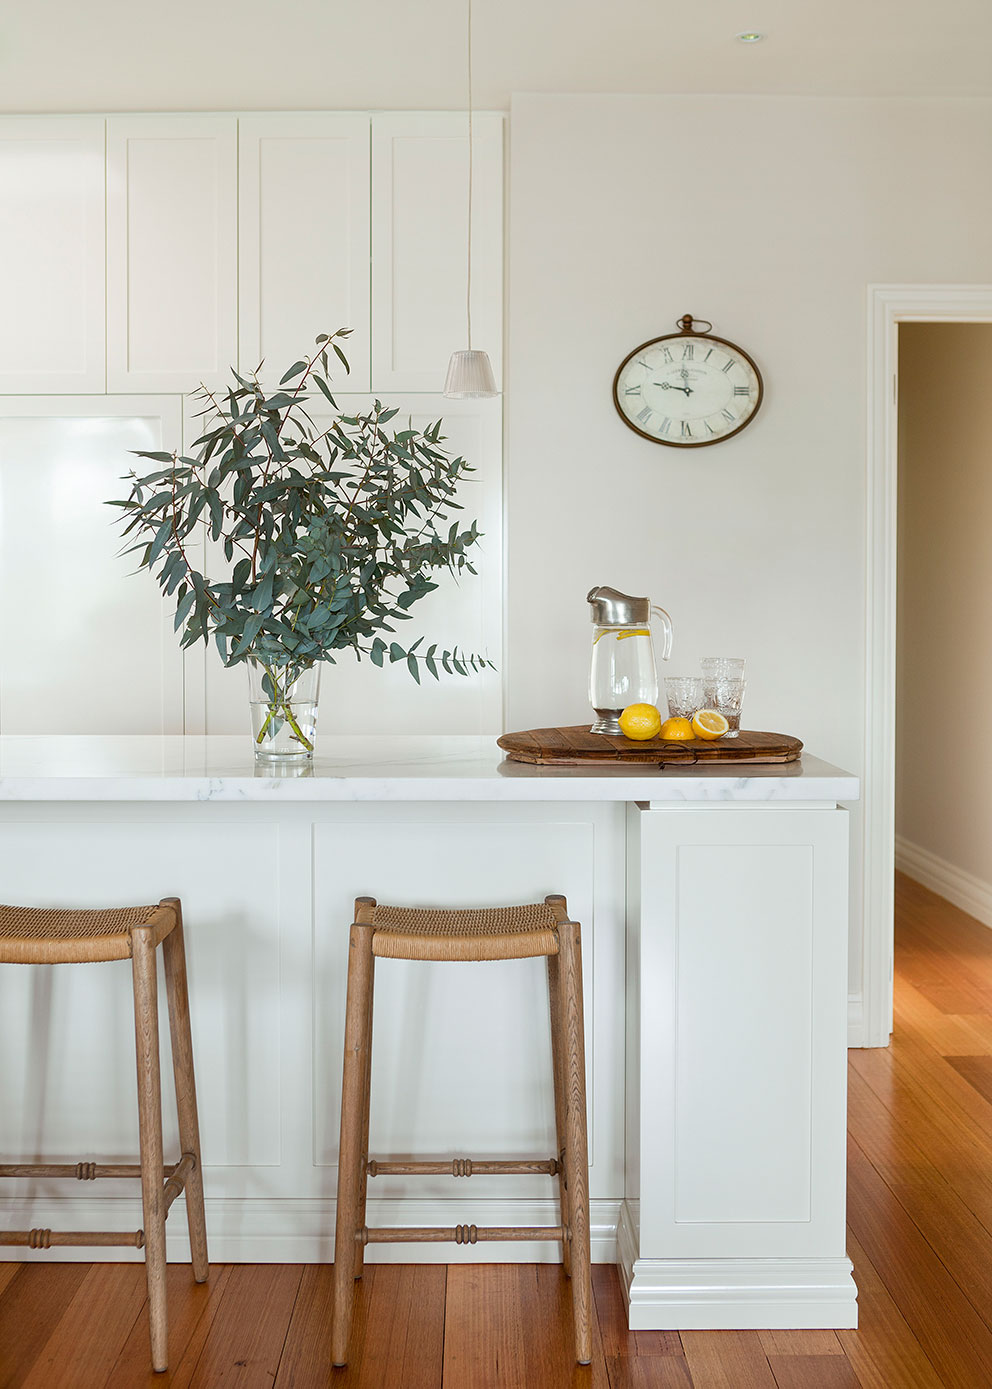 white-with-a-little-bit-of-grey-is-a-good-choice;-try-Dulux’s-Lexicon-Quarter-or-White-on-White-kitchen